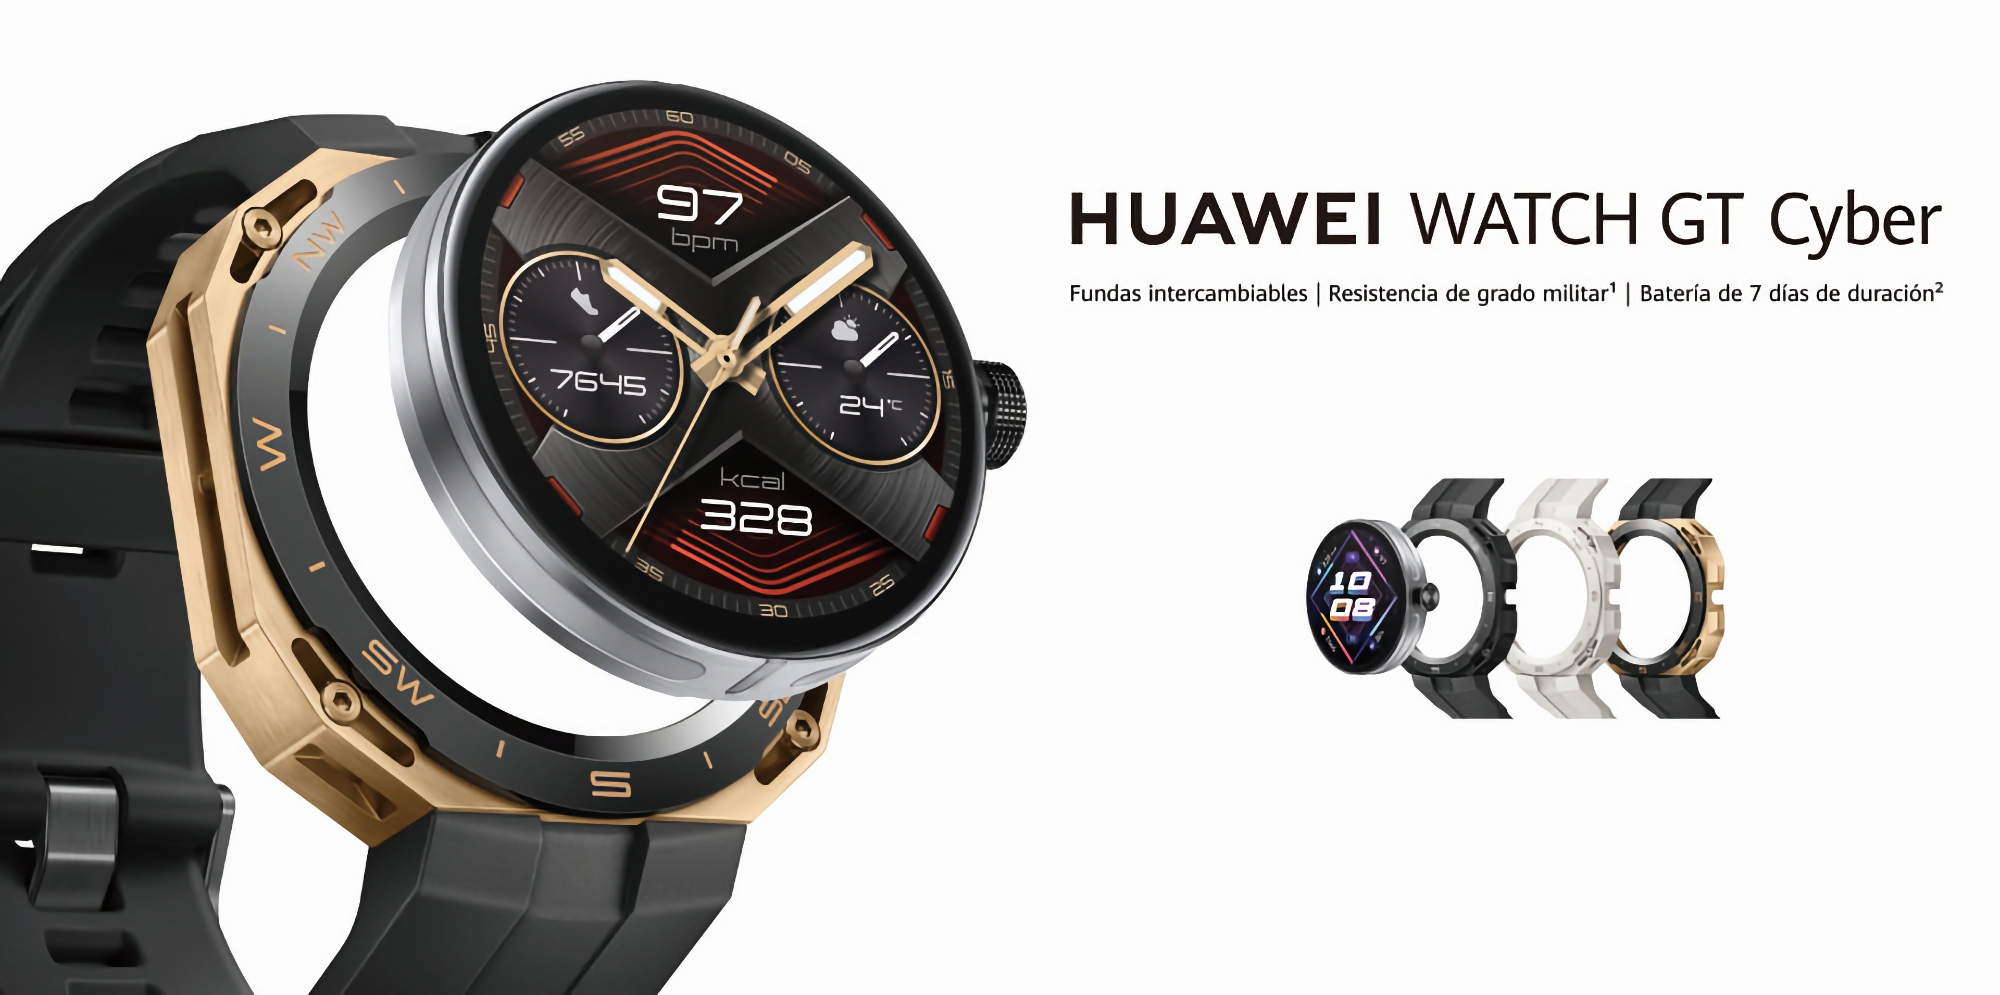 The Huawei Watch GT Cyber smartwatch with removable dial has made its debut outside of China